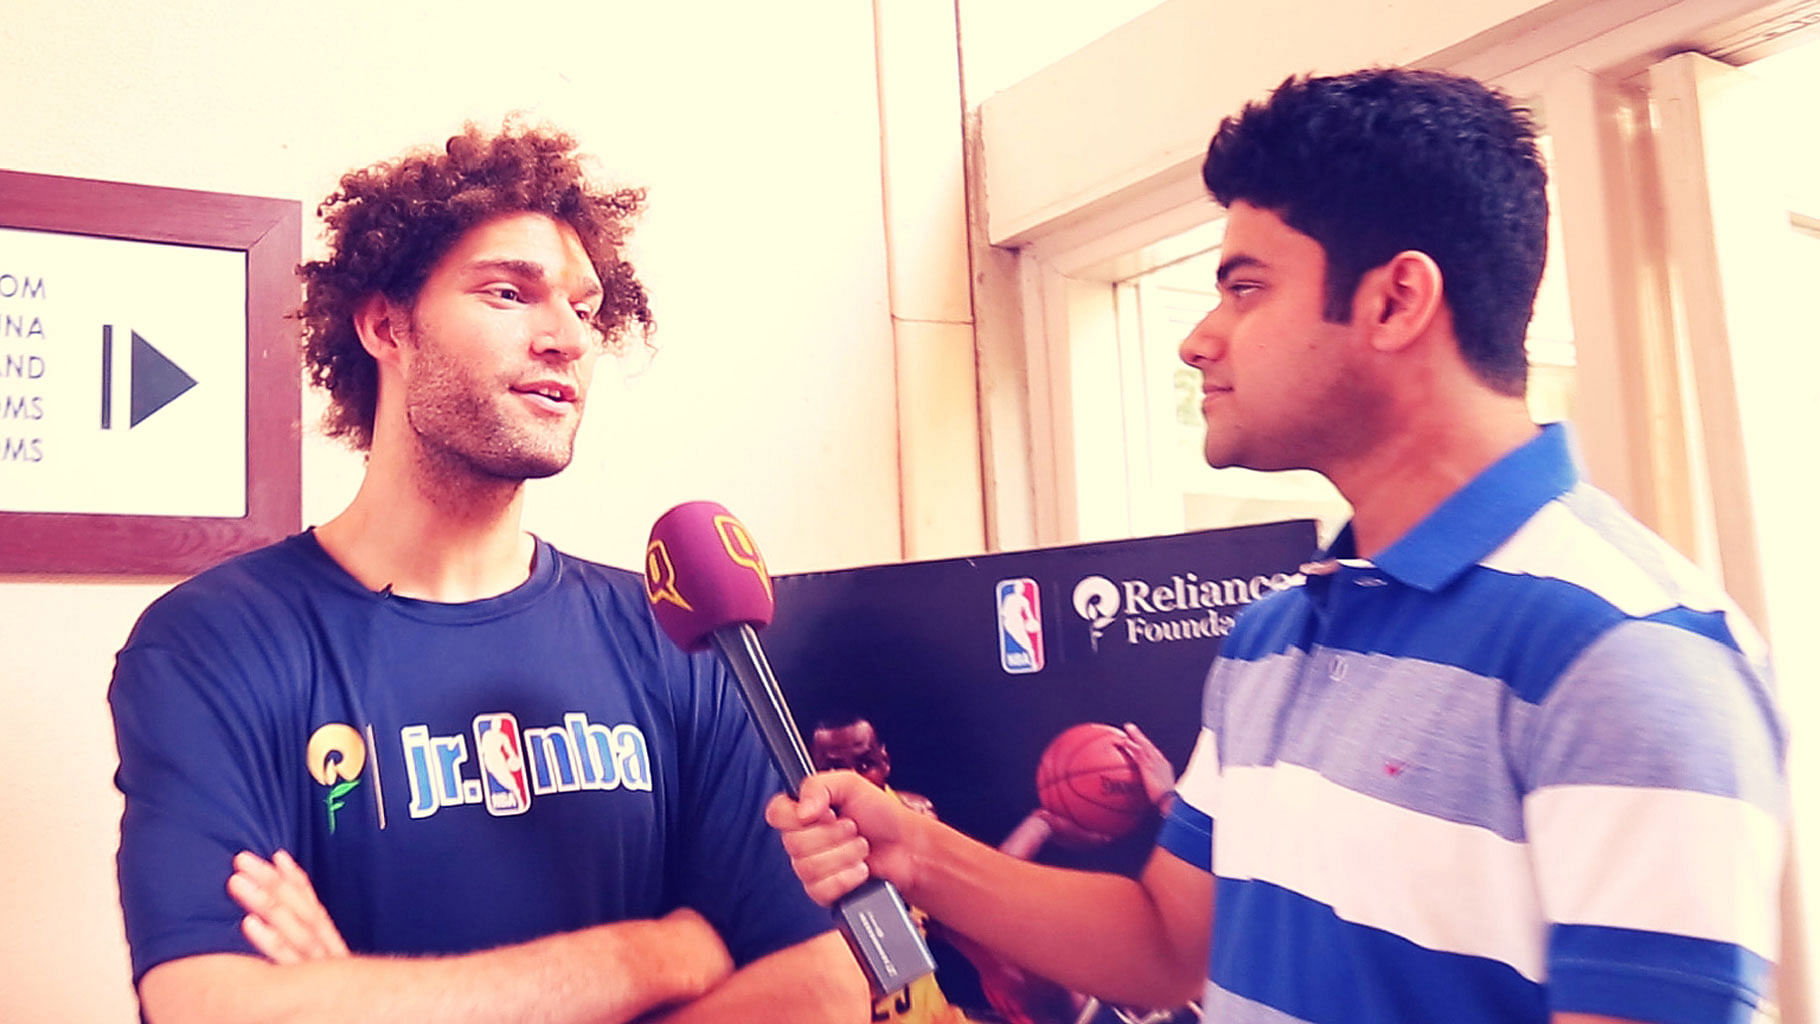 Robin Lopez Speaks about the NBA. (Photo: The Quint)